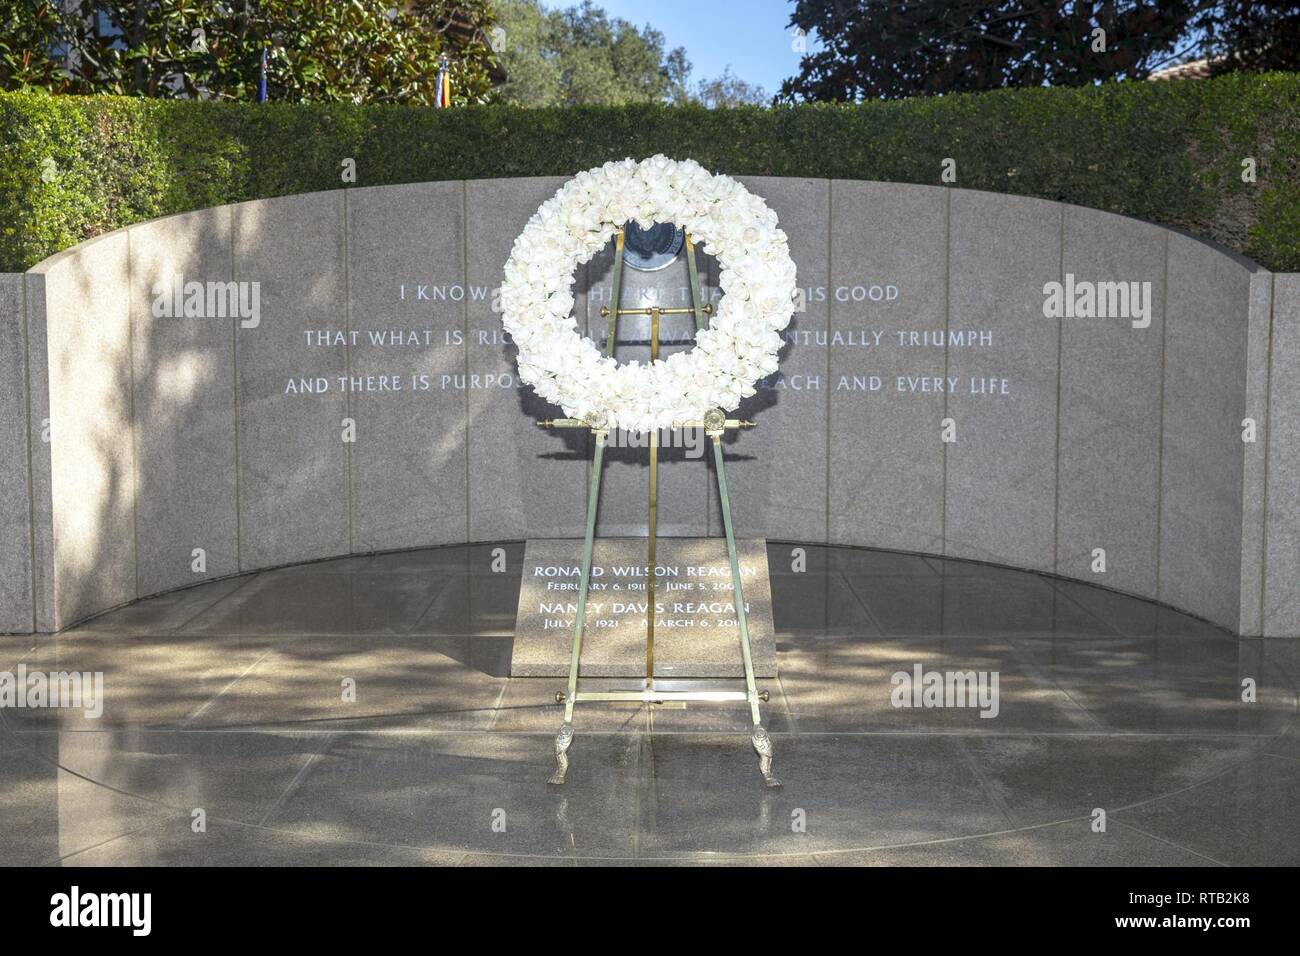 A ceremonial wreath is displayed in front of the Ronald Reagan memorial during the Ronald Reagan Wreath Laying ceremony at the Ronald Reagan Presidential Foundation and Library, Simi Valley, California, Feb. 6, 2019. The ceremony was held in honor of President Reagan as a tribute to his faithful service to the United States, and in celebration of what would have been his 108th birthday. Stock Photo